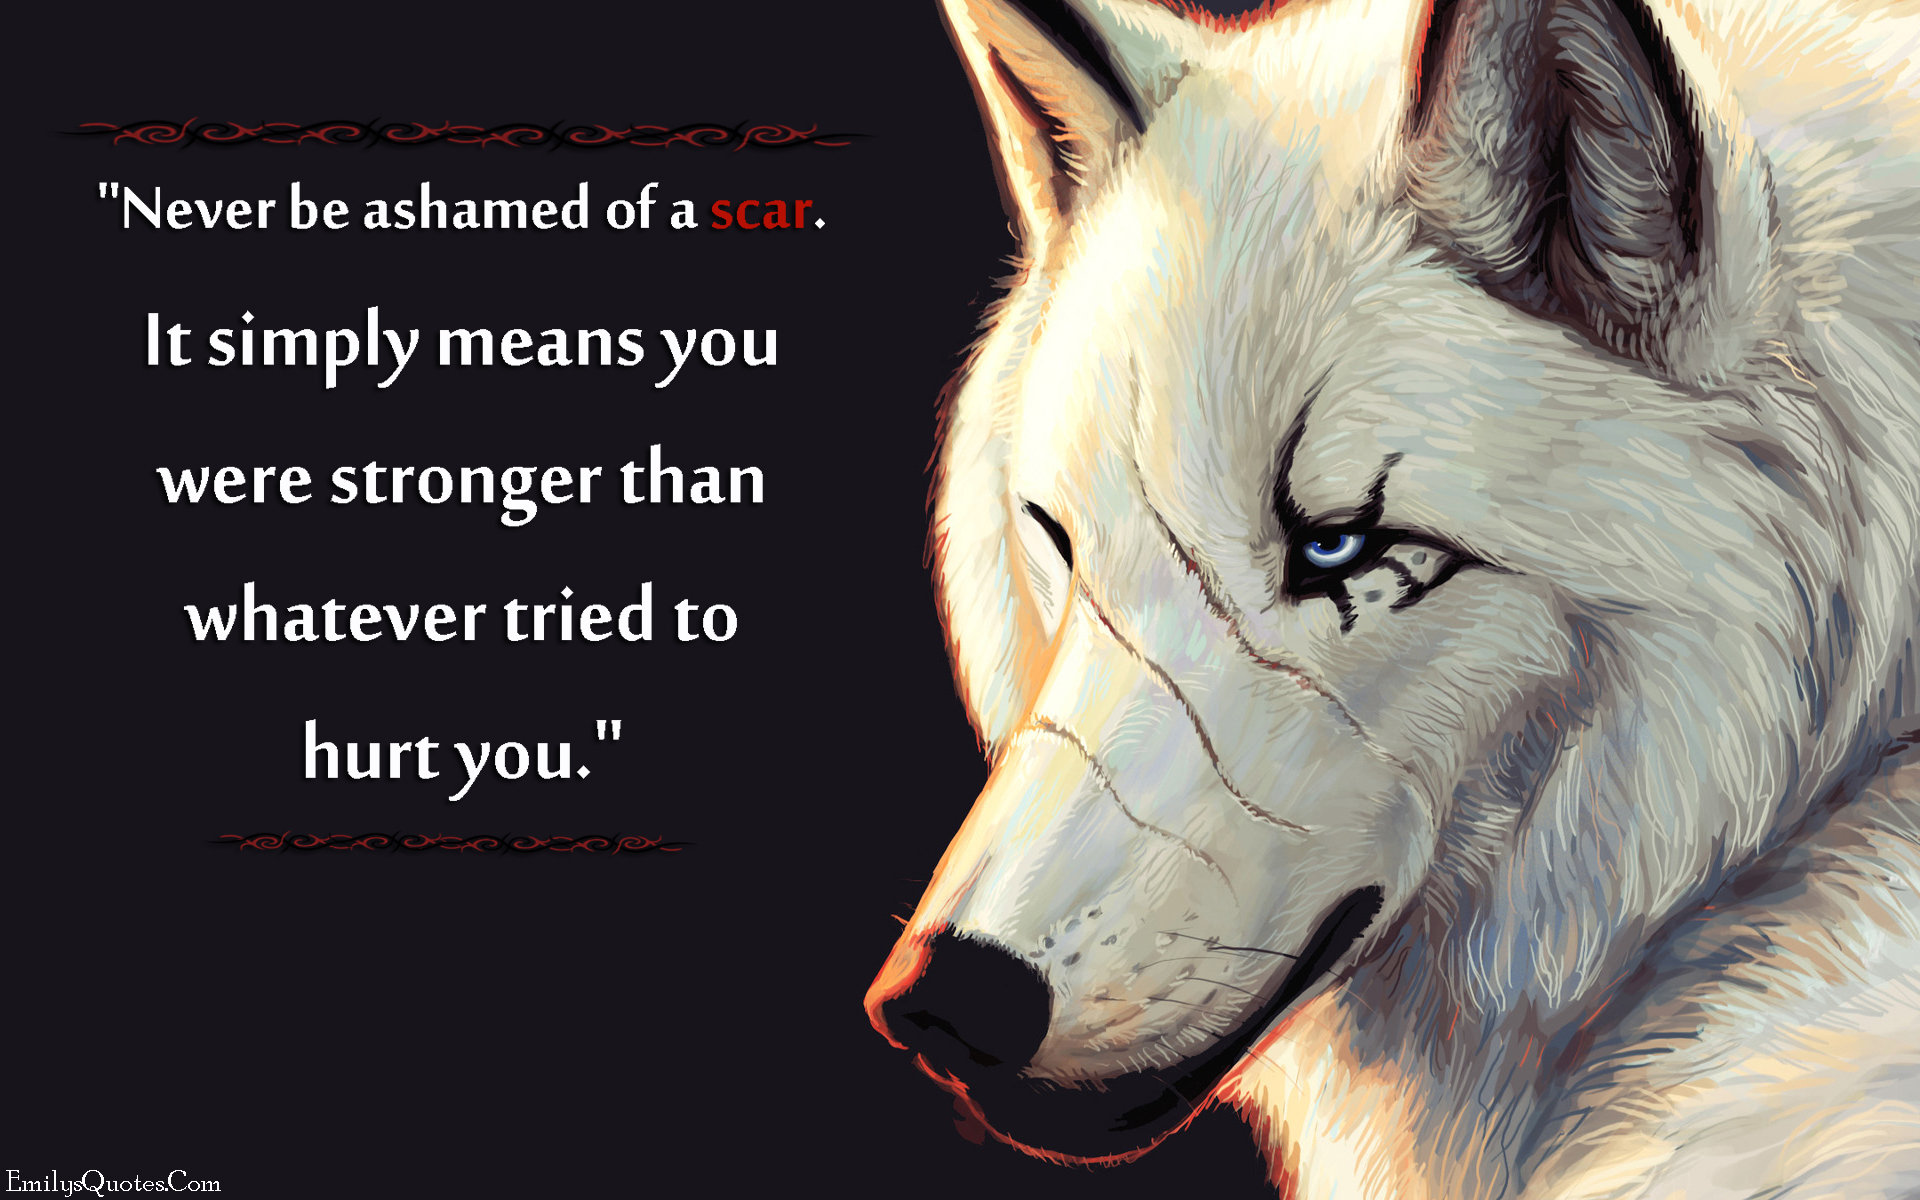 Never be ashamed of a scar. It simply means you were stronger than whatever tried to hurt you